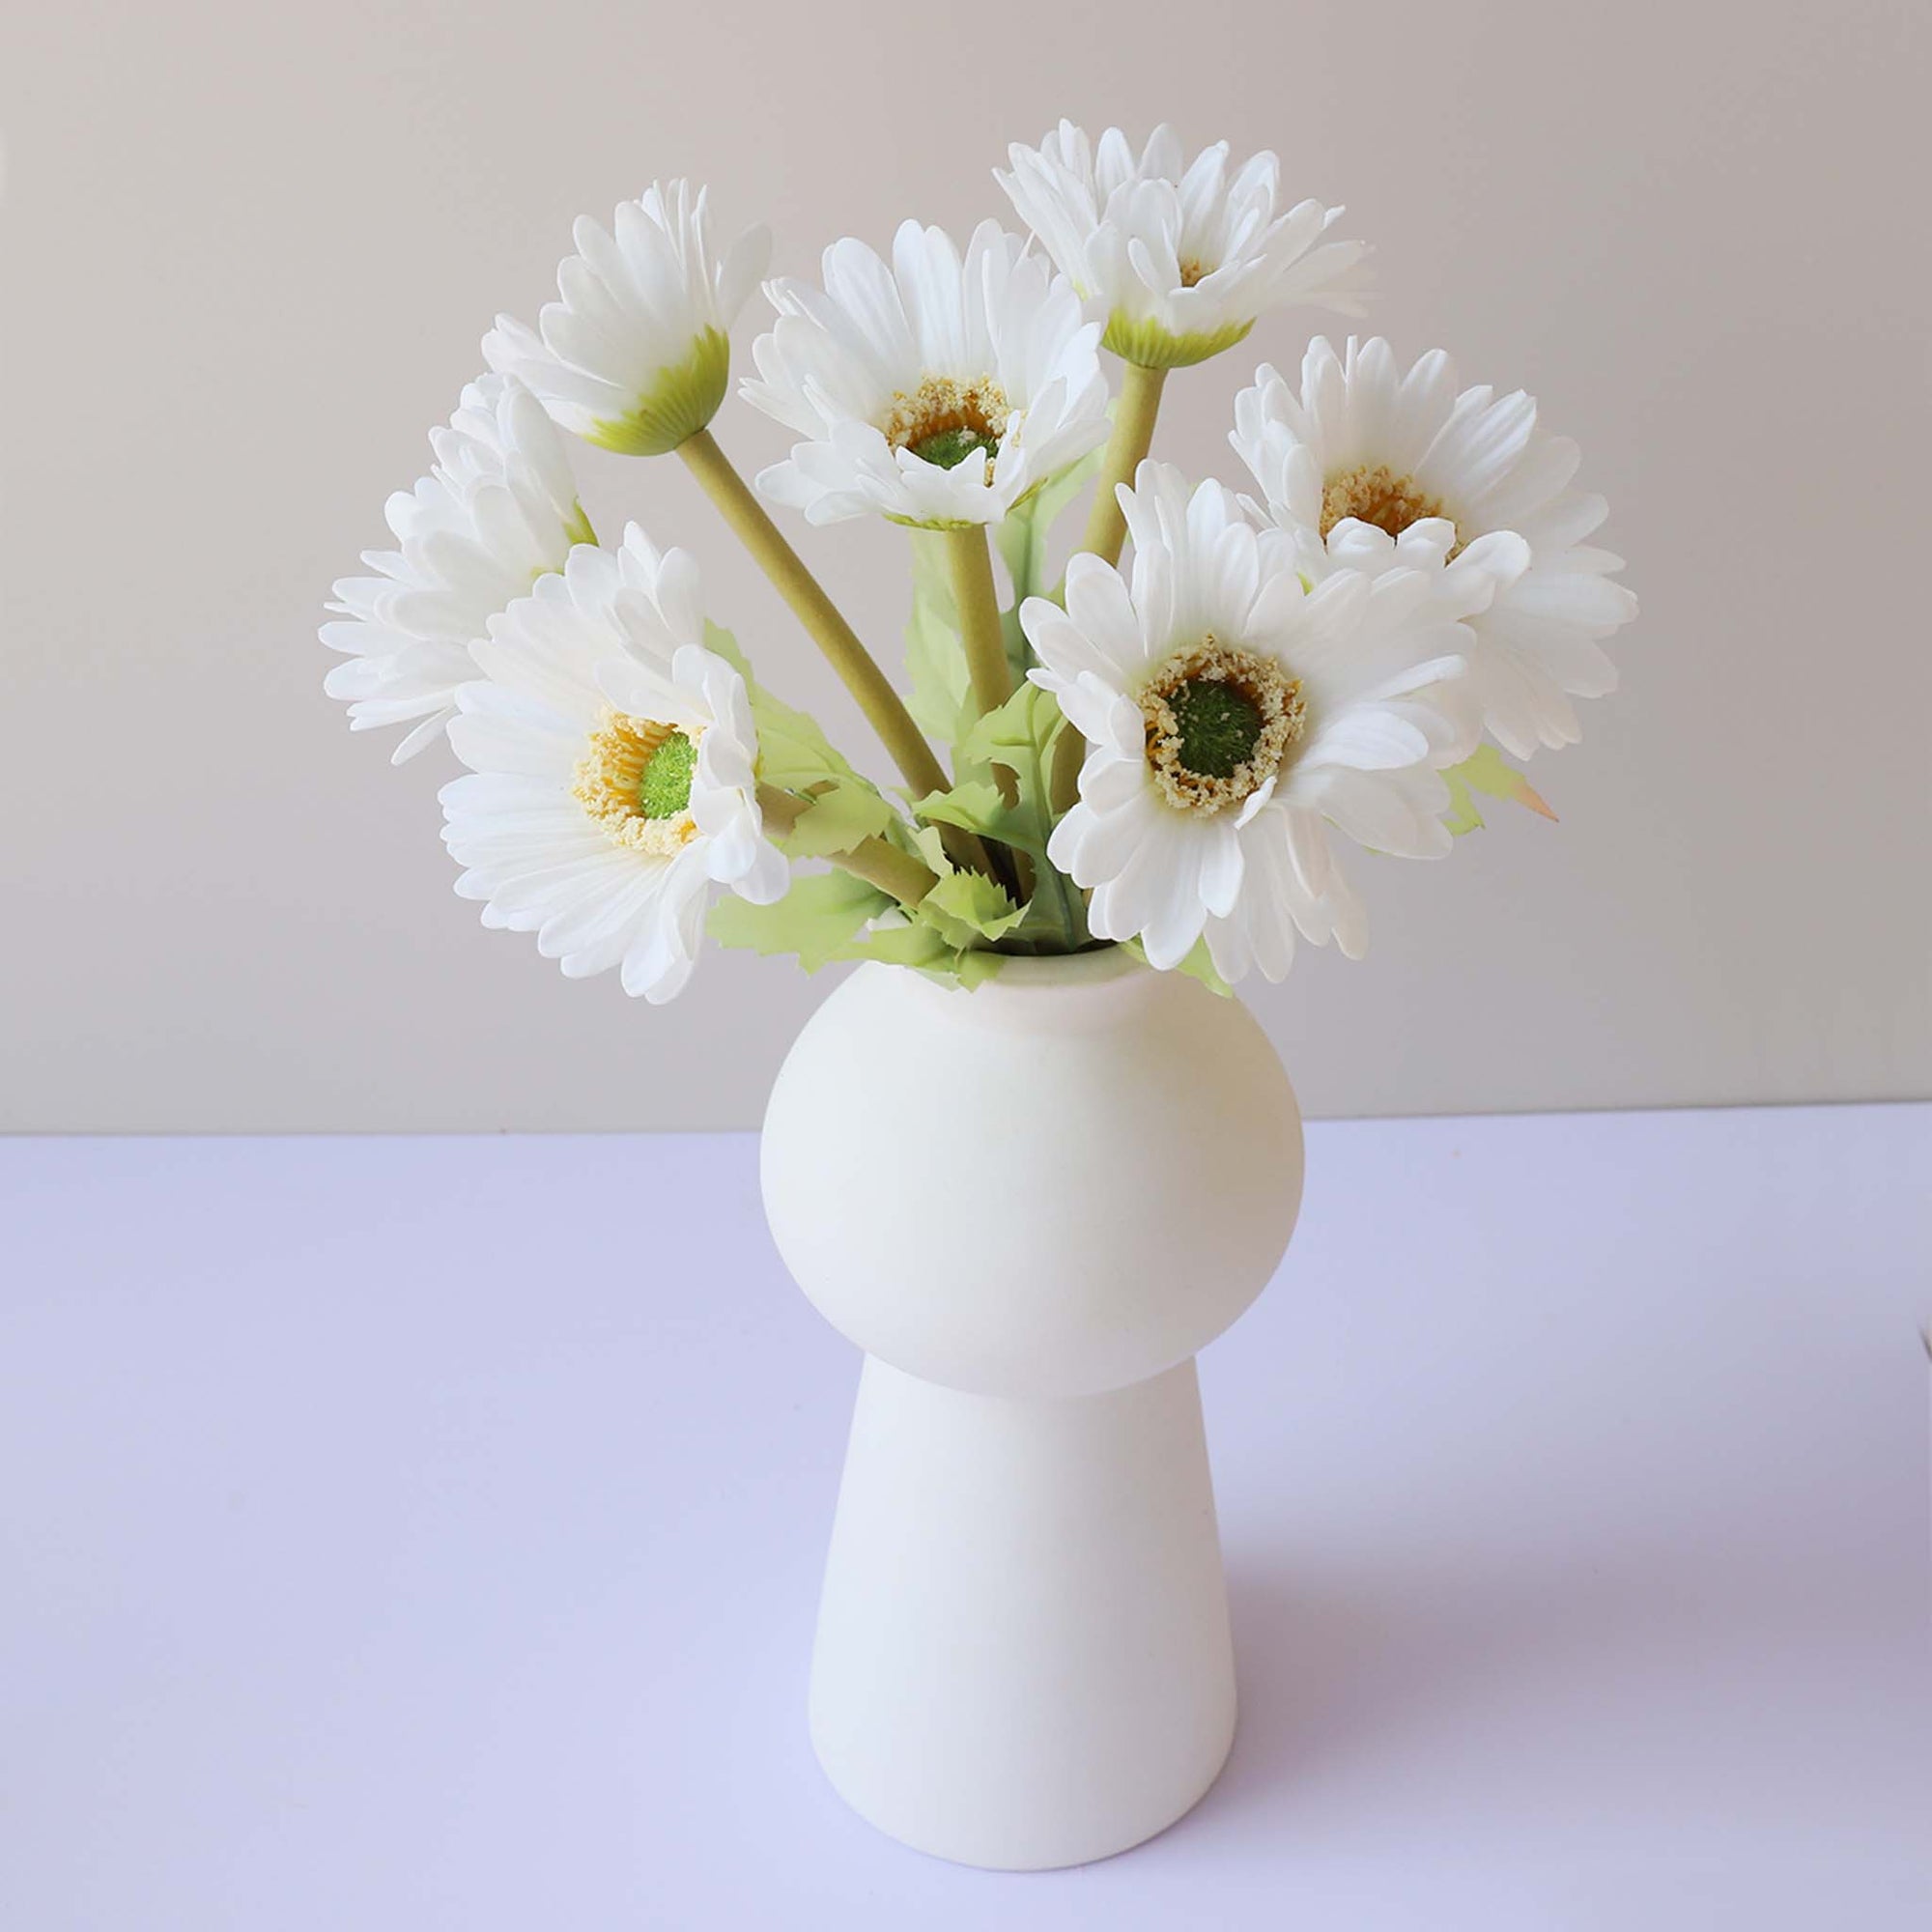 Artificial Gerbera Daisy Bouquet Real Touch Flowers for Wedding Bouquets